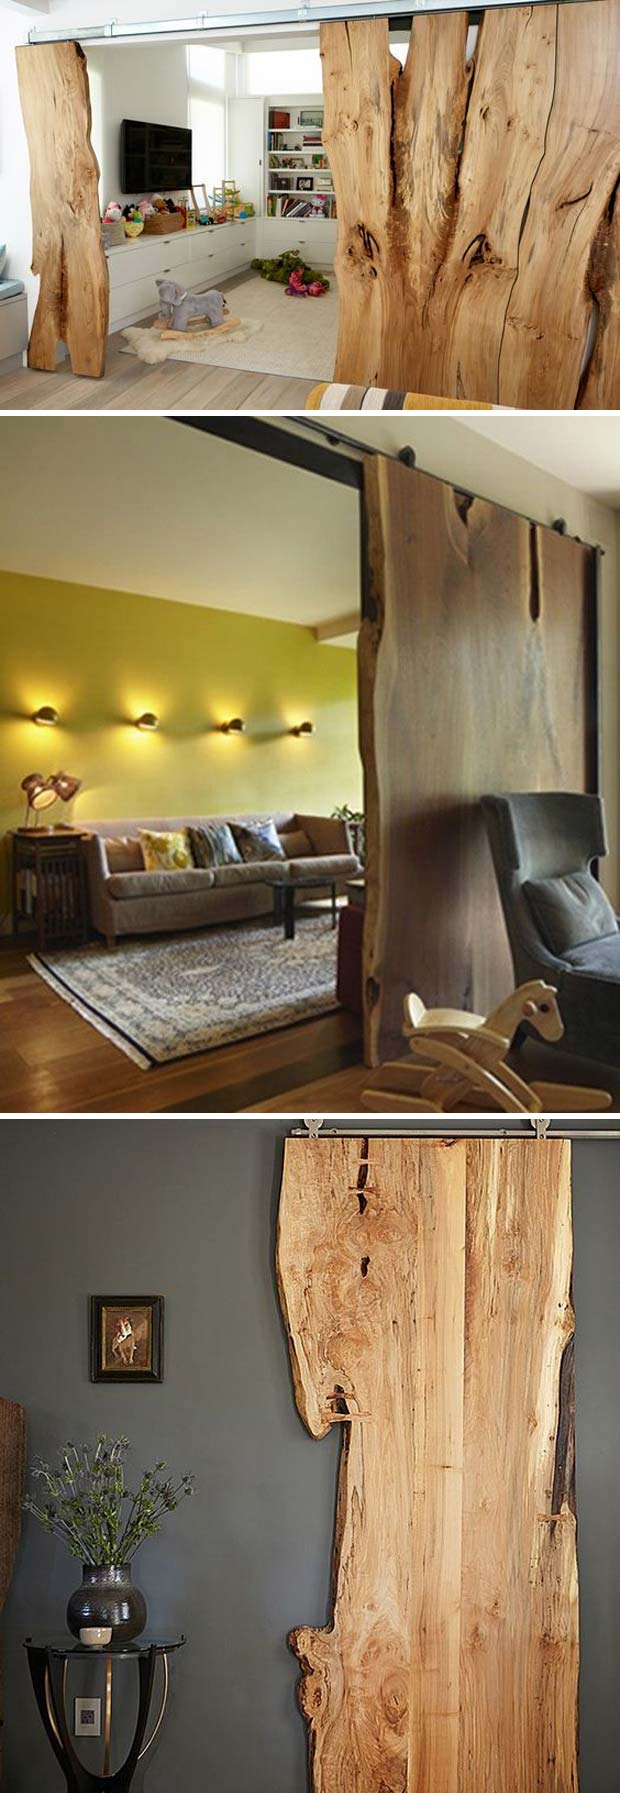 10 Ideas for Building Live Edge Wood Furniture